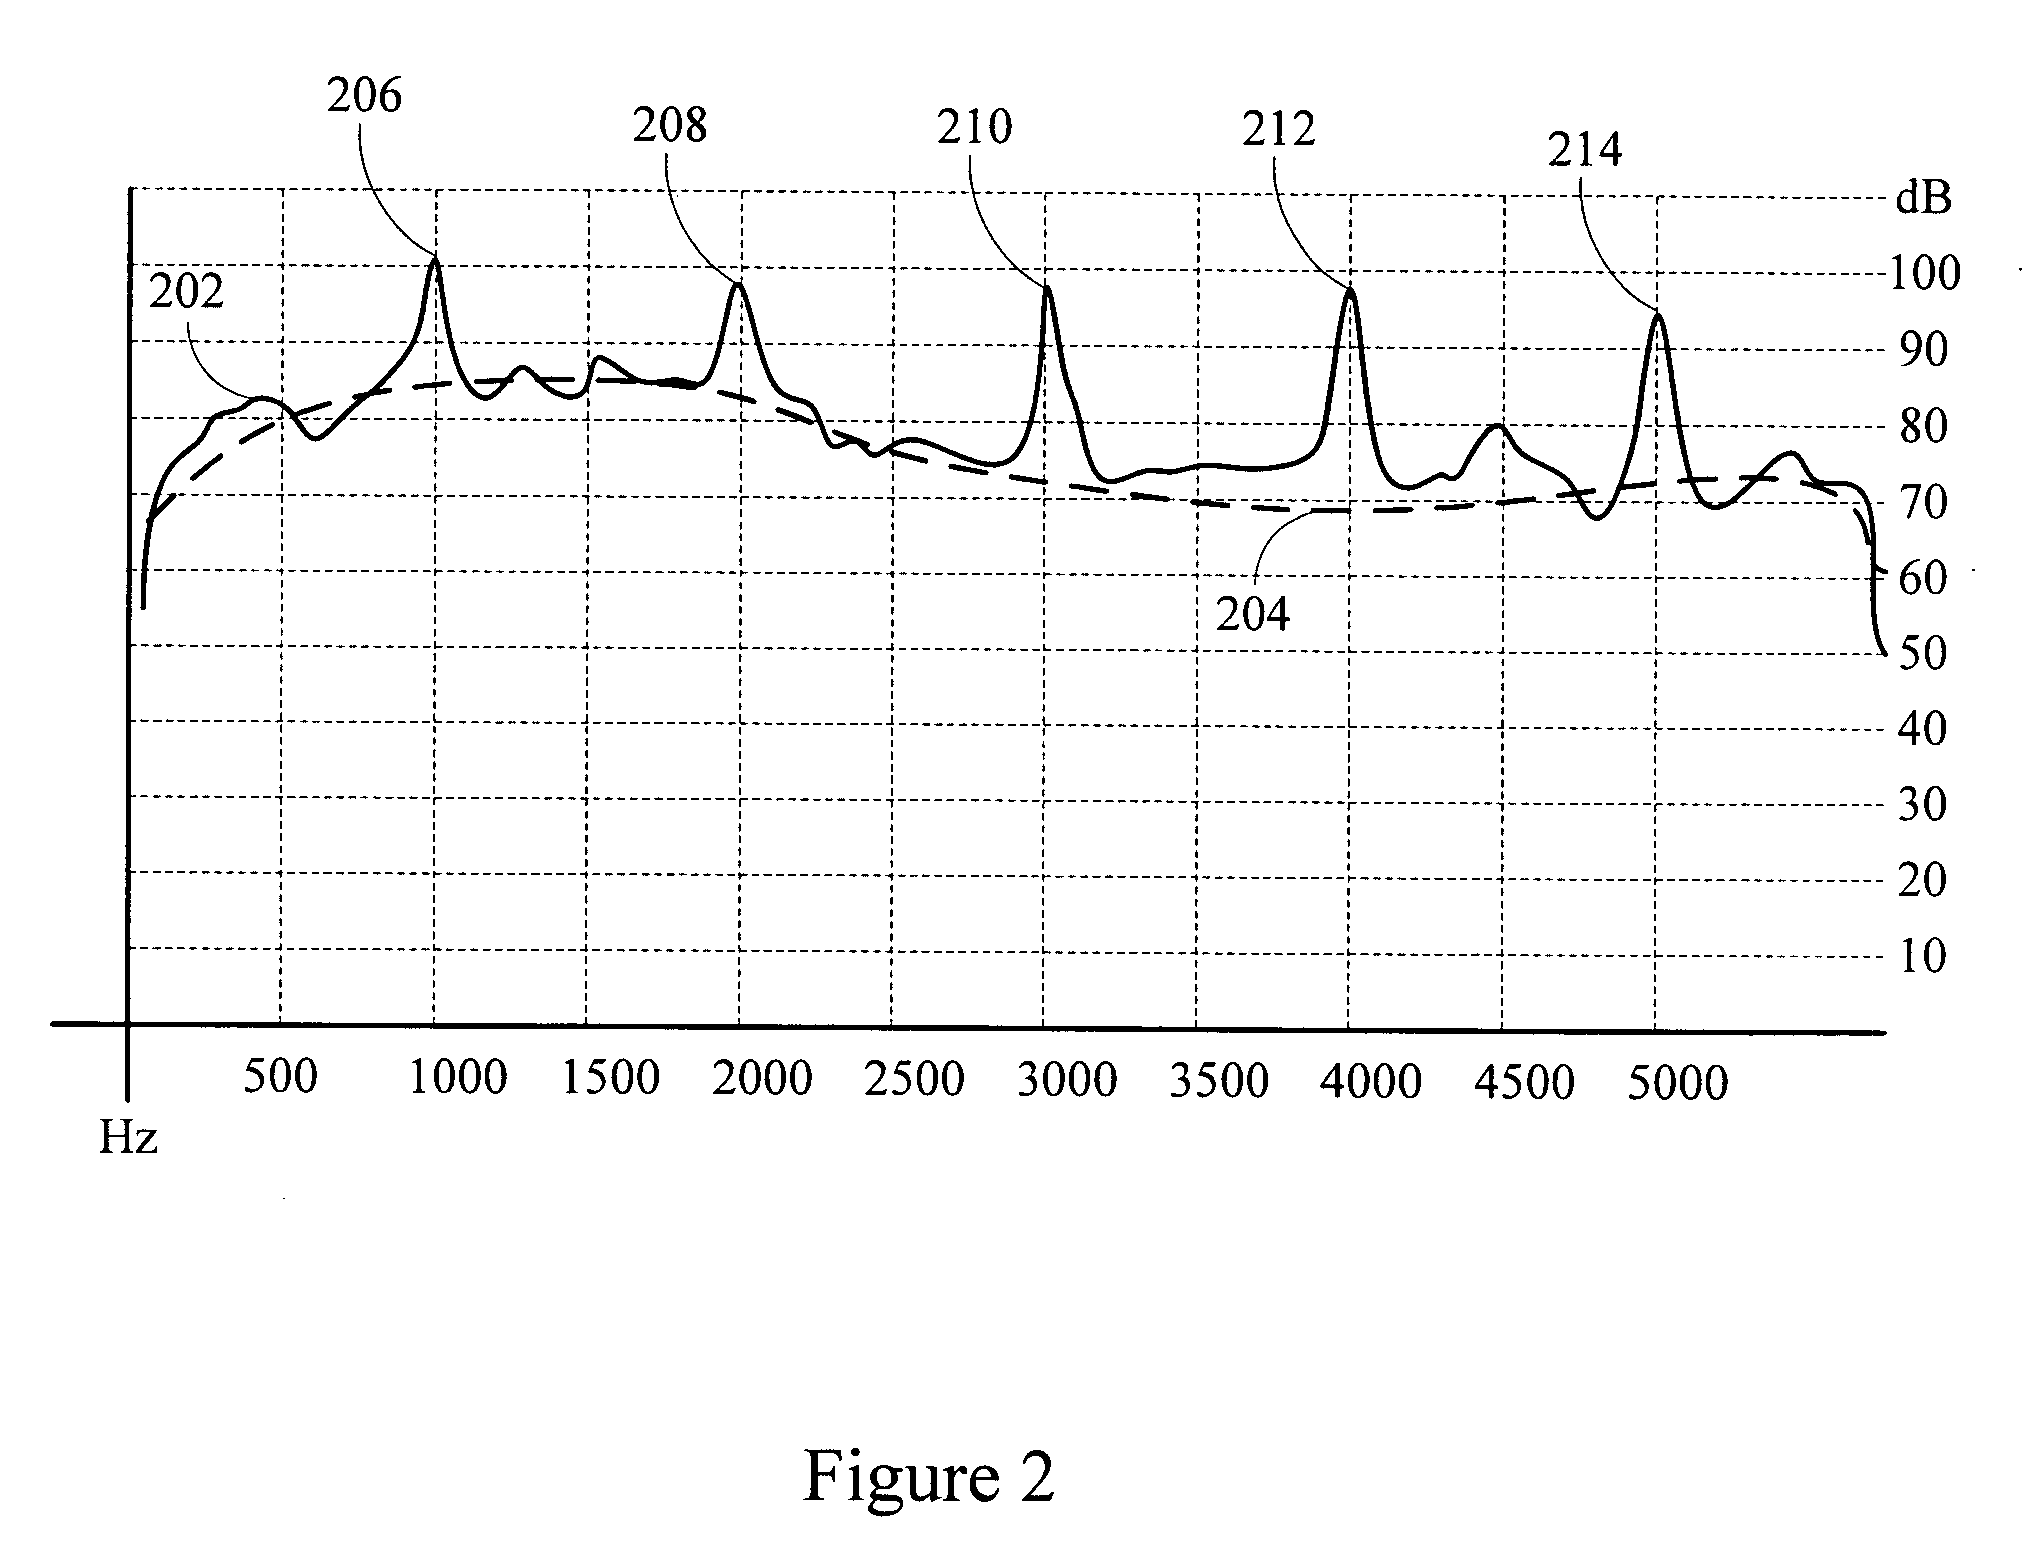 Signal processing system for tonal noise robustness